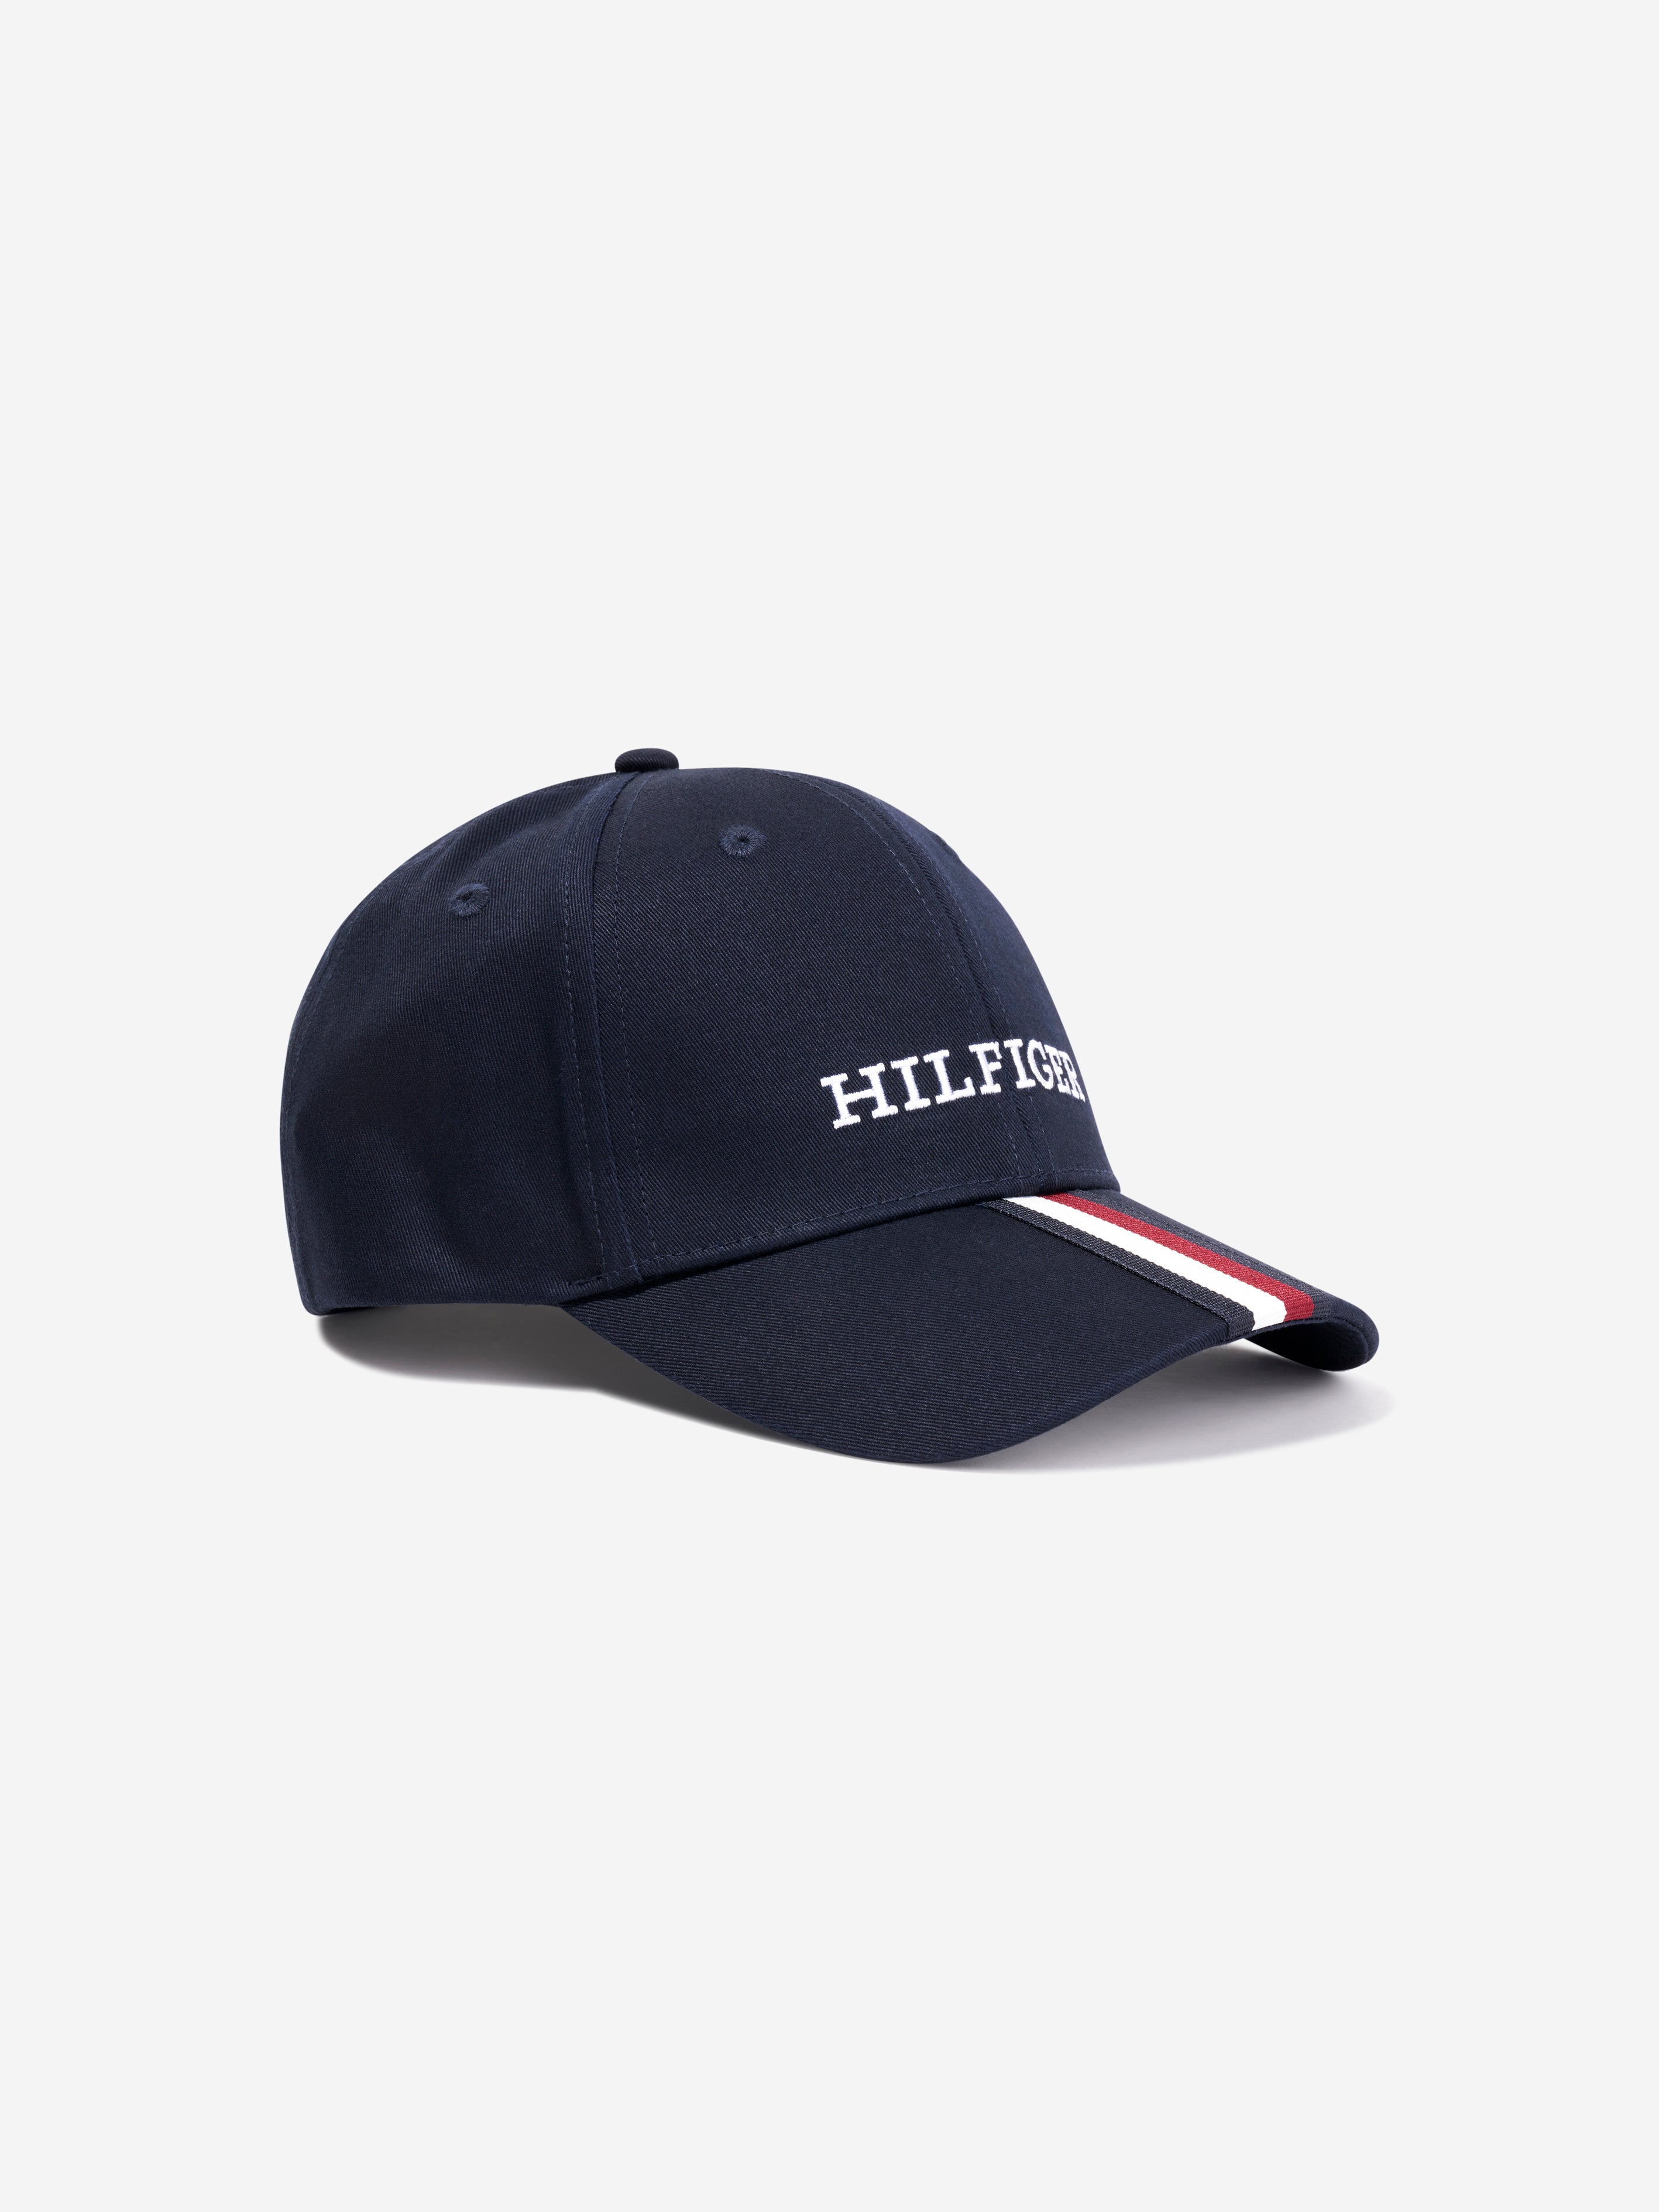 Tommy Hilfiger Kids Corporate Hilfiger Cap in Navy | Childsplay Clothing